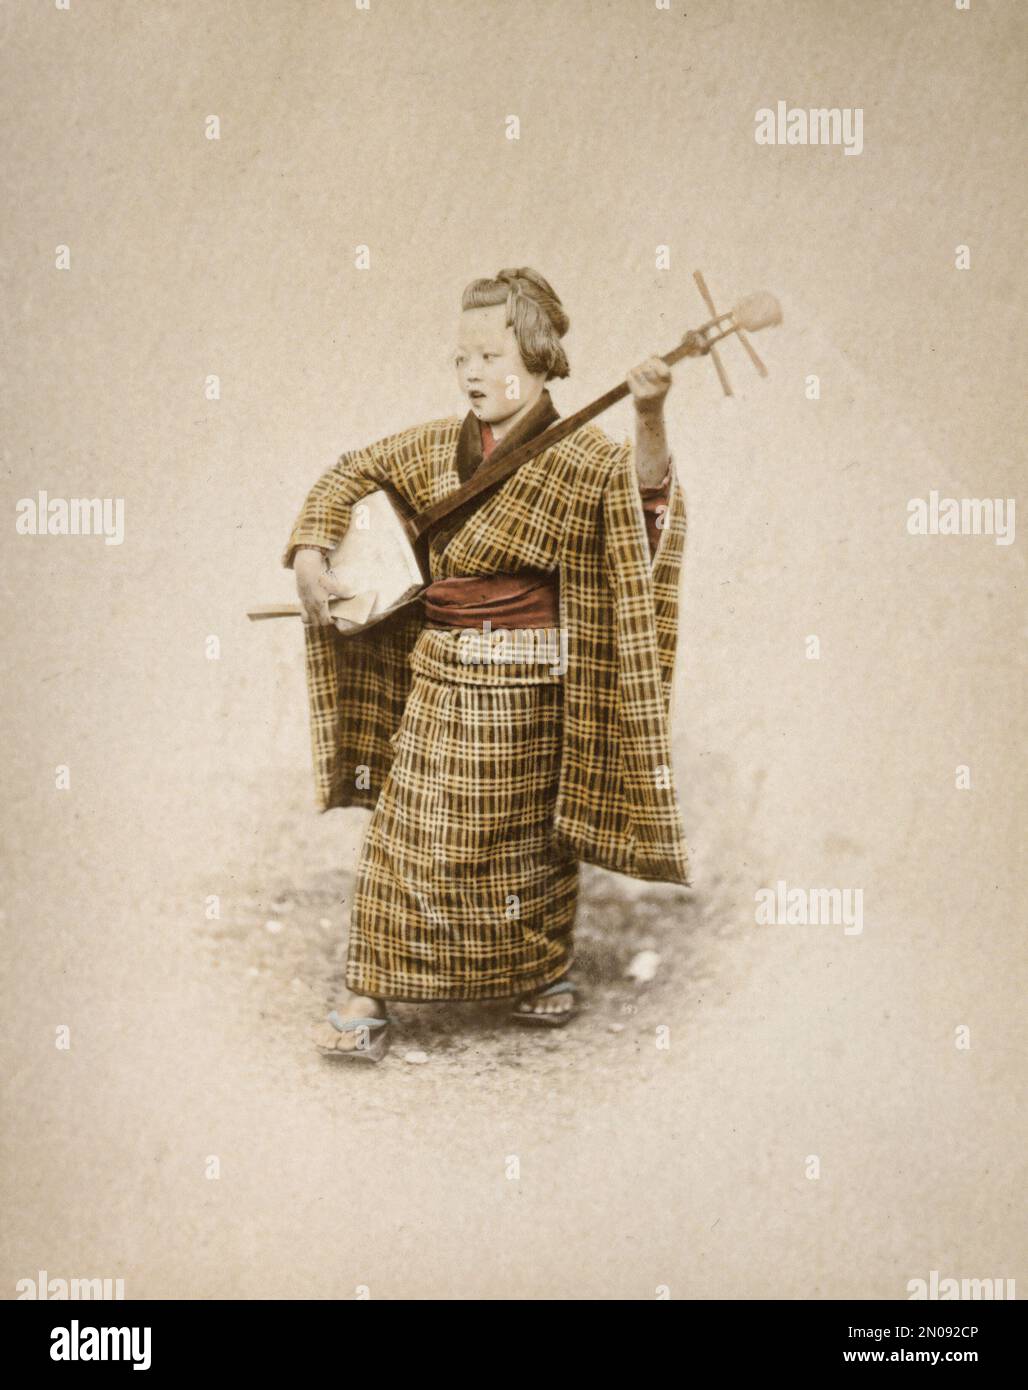 A photograph of a Japanese woman playing music. Published in Views & Costumes of Japan by Stillfried and Andersen (Yokohama, 1877). Stock Photo